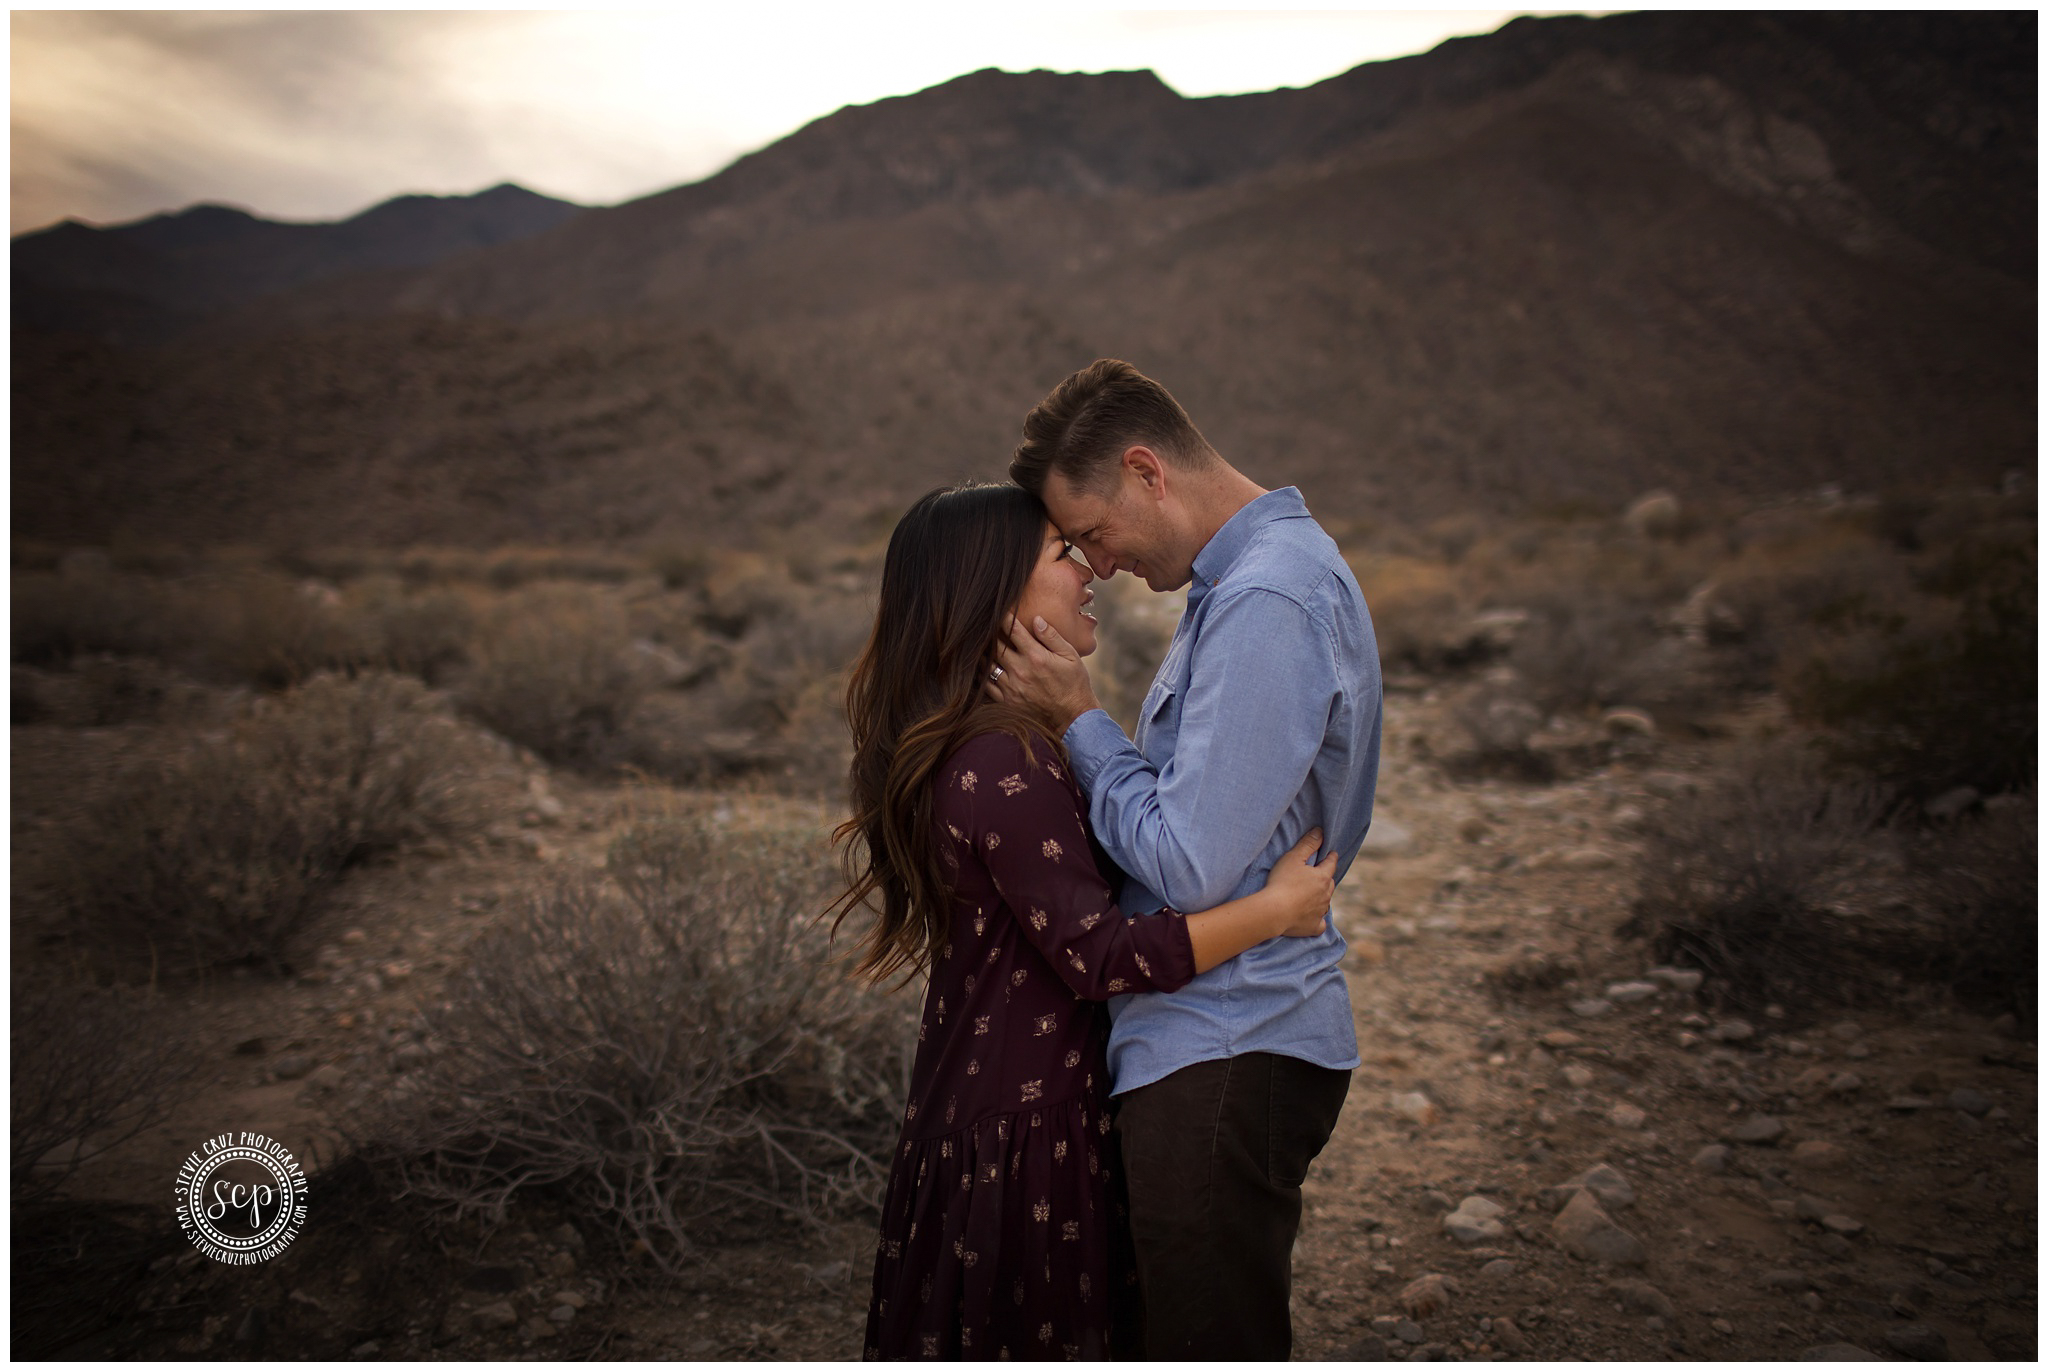 Palm Desert family photographer offering family pictures. Photo by Stevie Cruz Photography